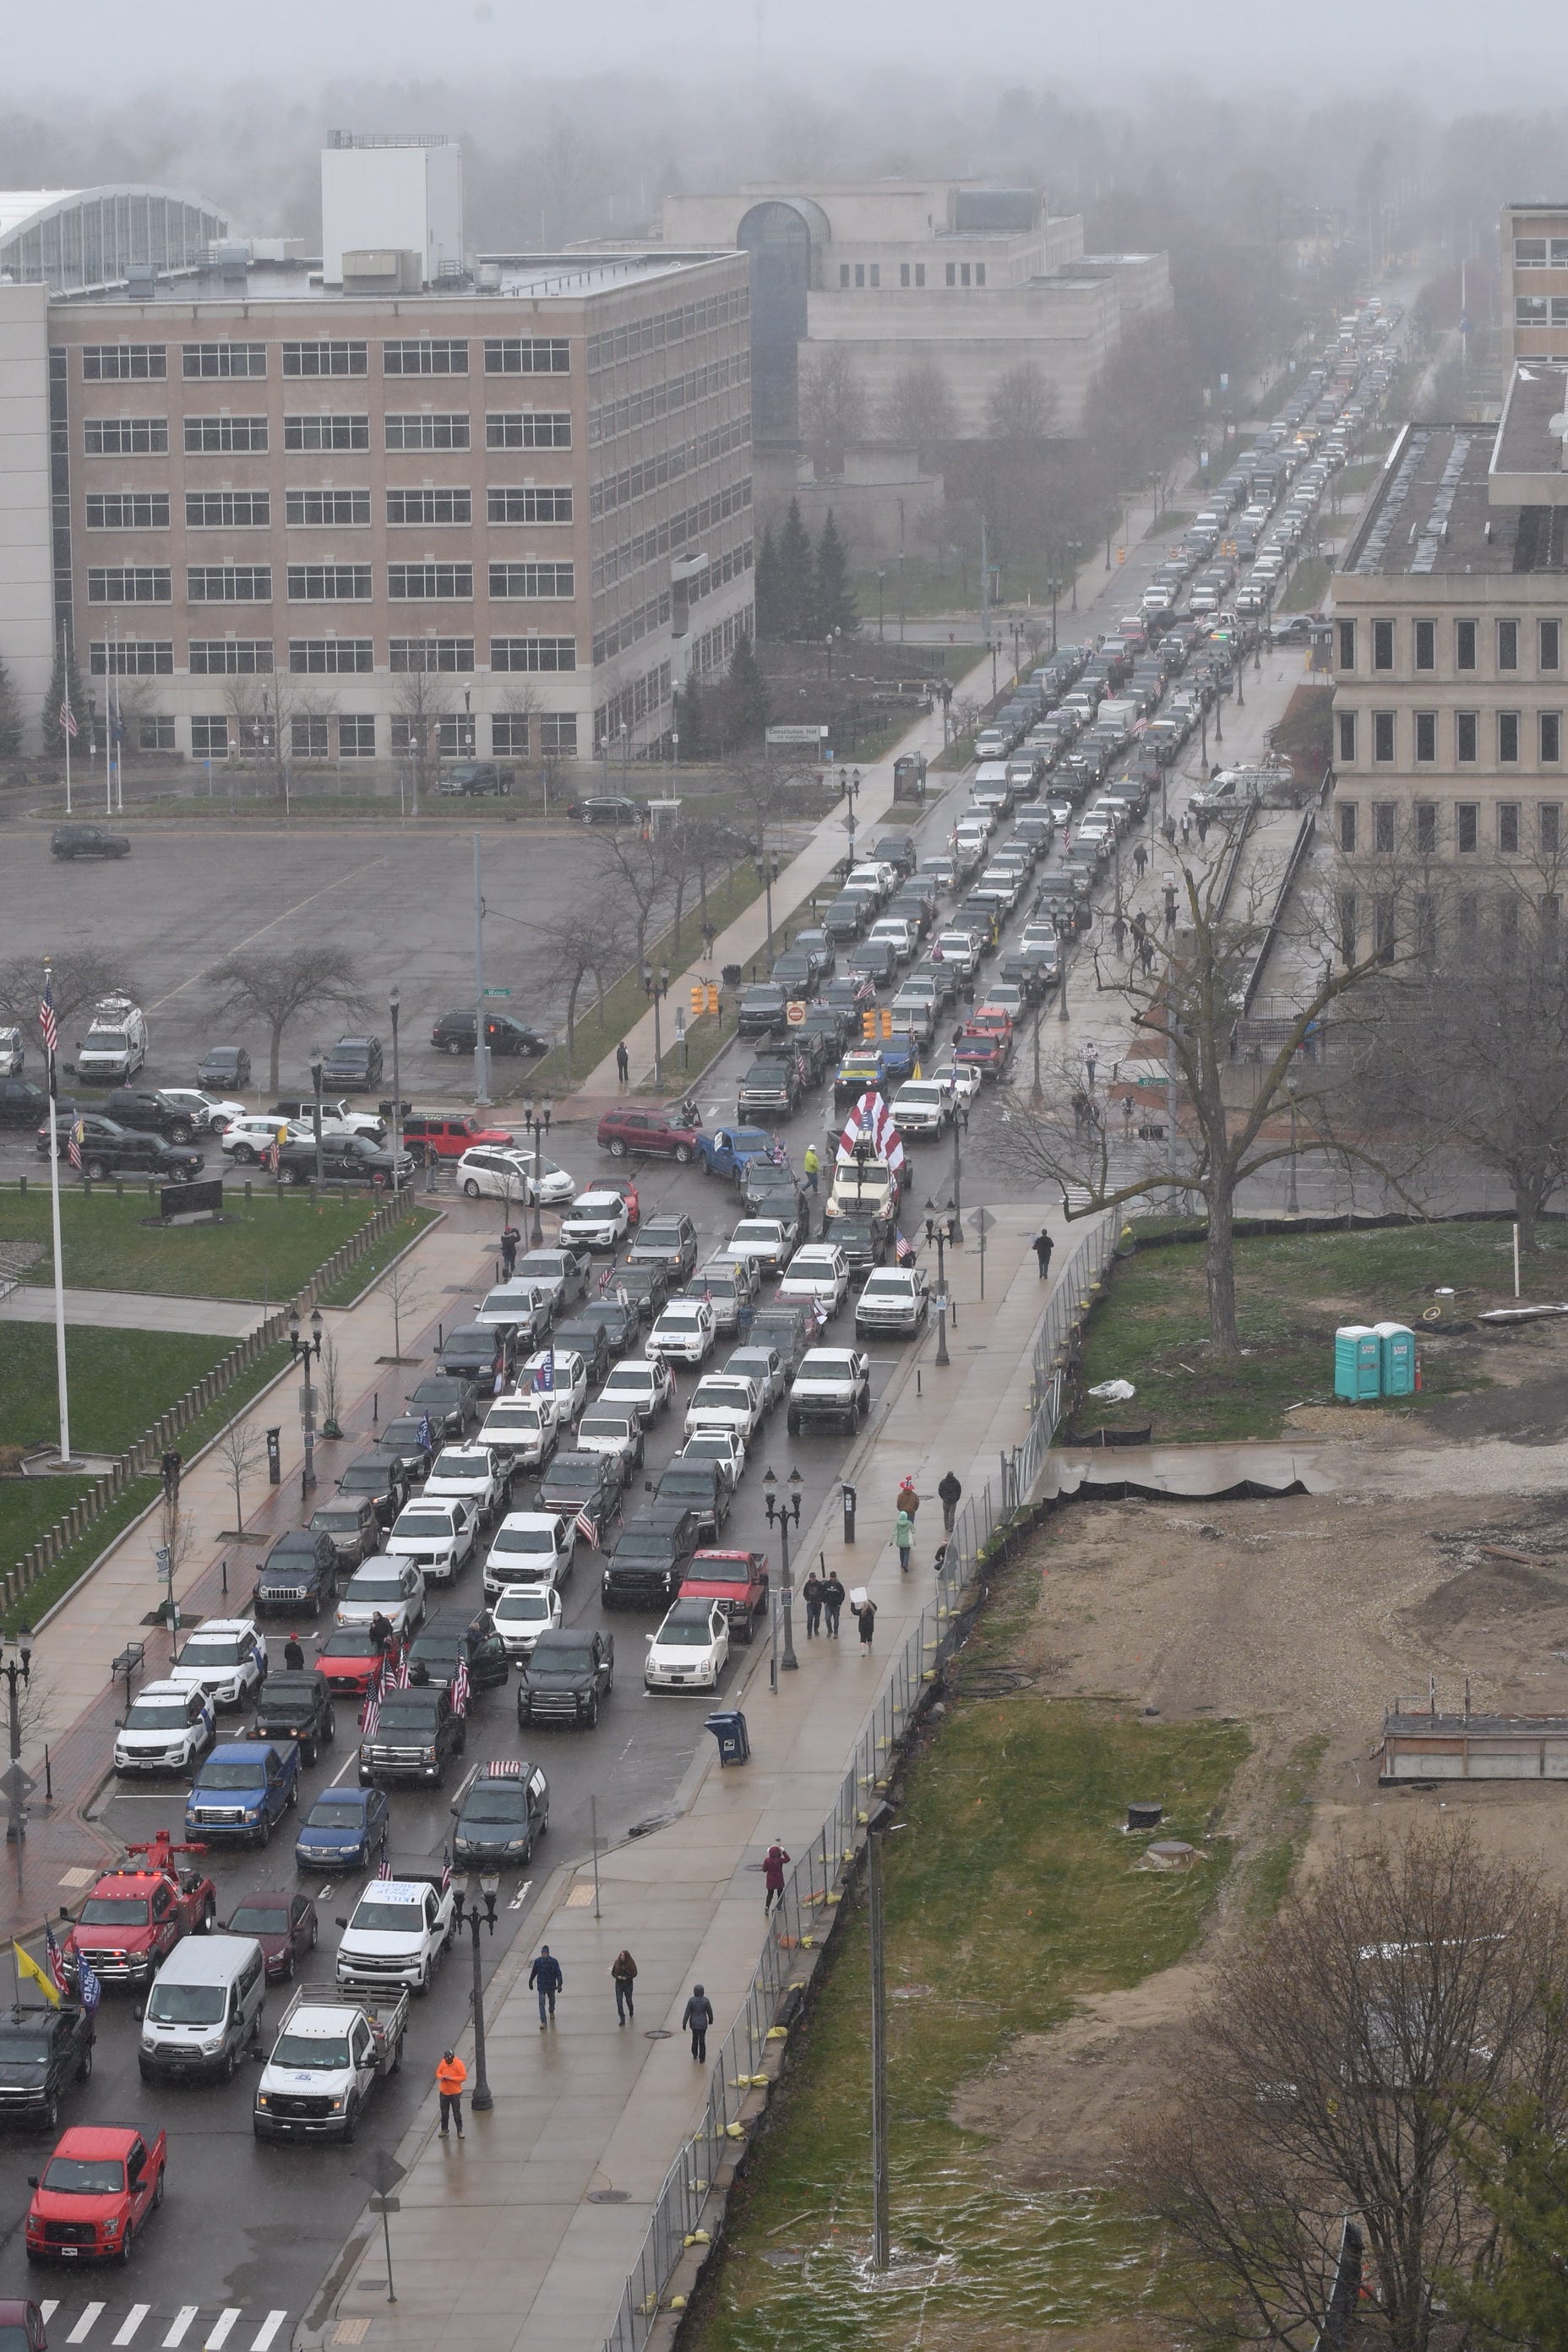 Hundreds of vehicles driven by individuals protesting Gov. Gretchen Whitmer ' s stay-home order jam Allegan Street near the Capitol in Lansing, honking their horns and raising a ruckus before the official protest is even set to begin at noon on Wednesday, April 15, 2020.